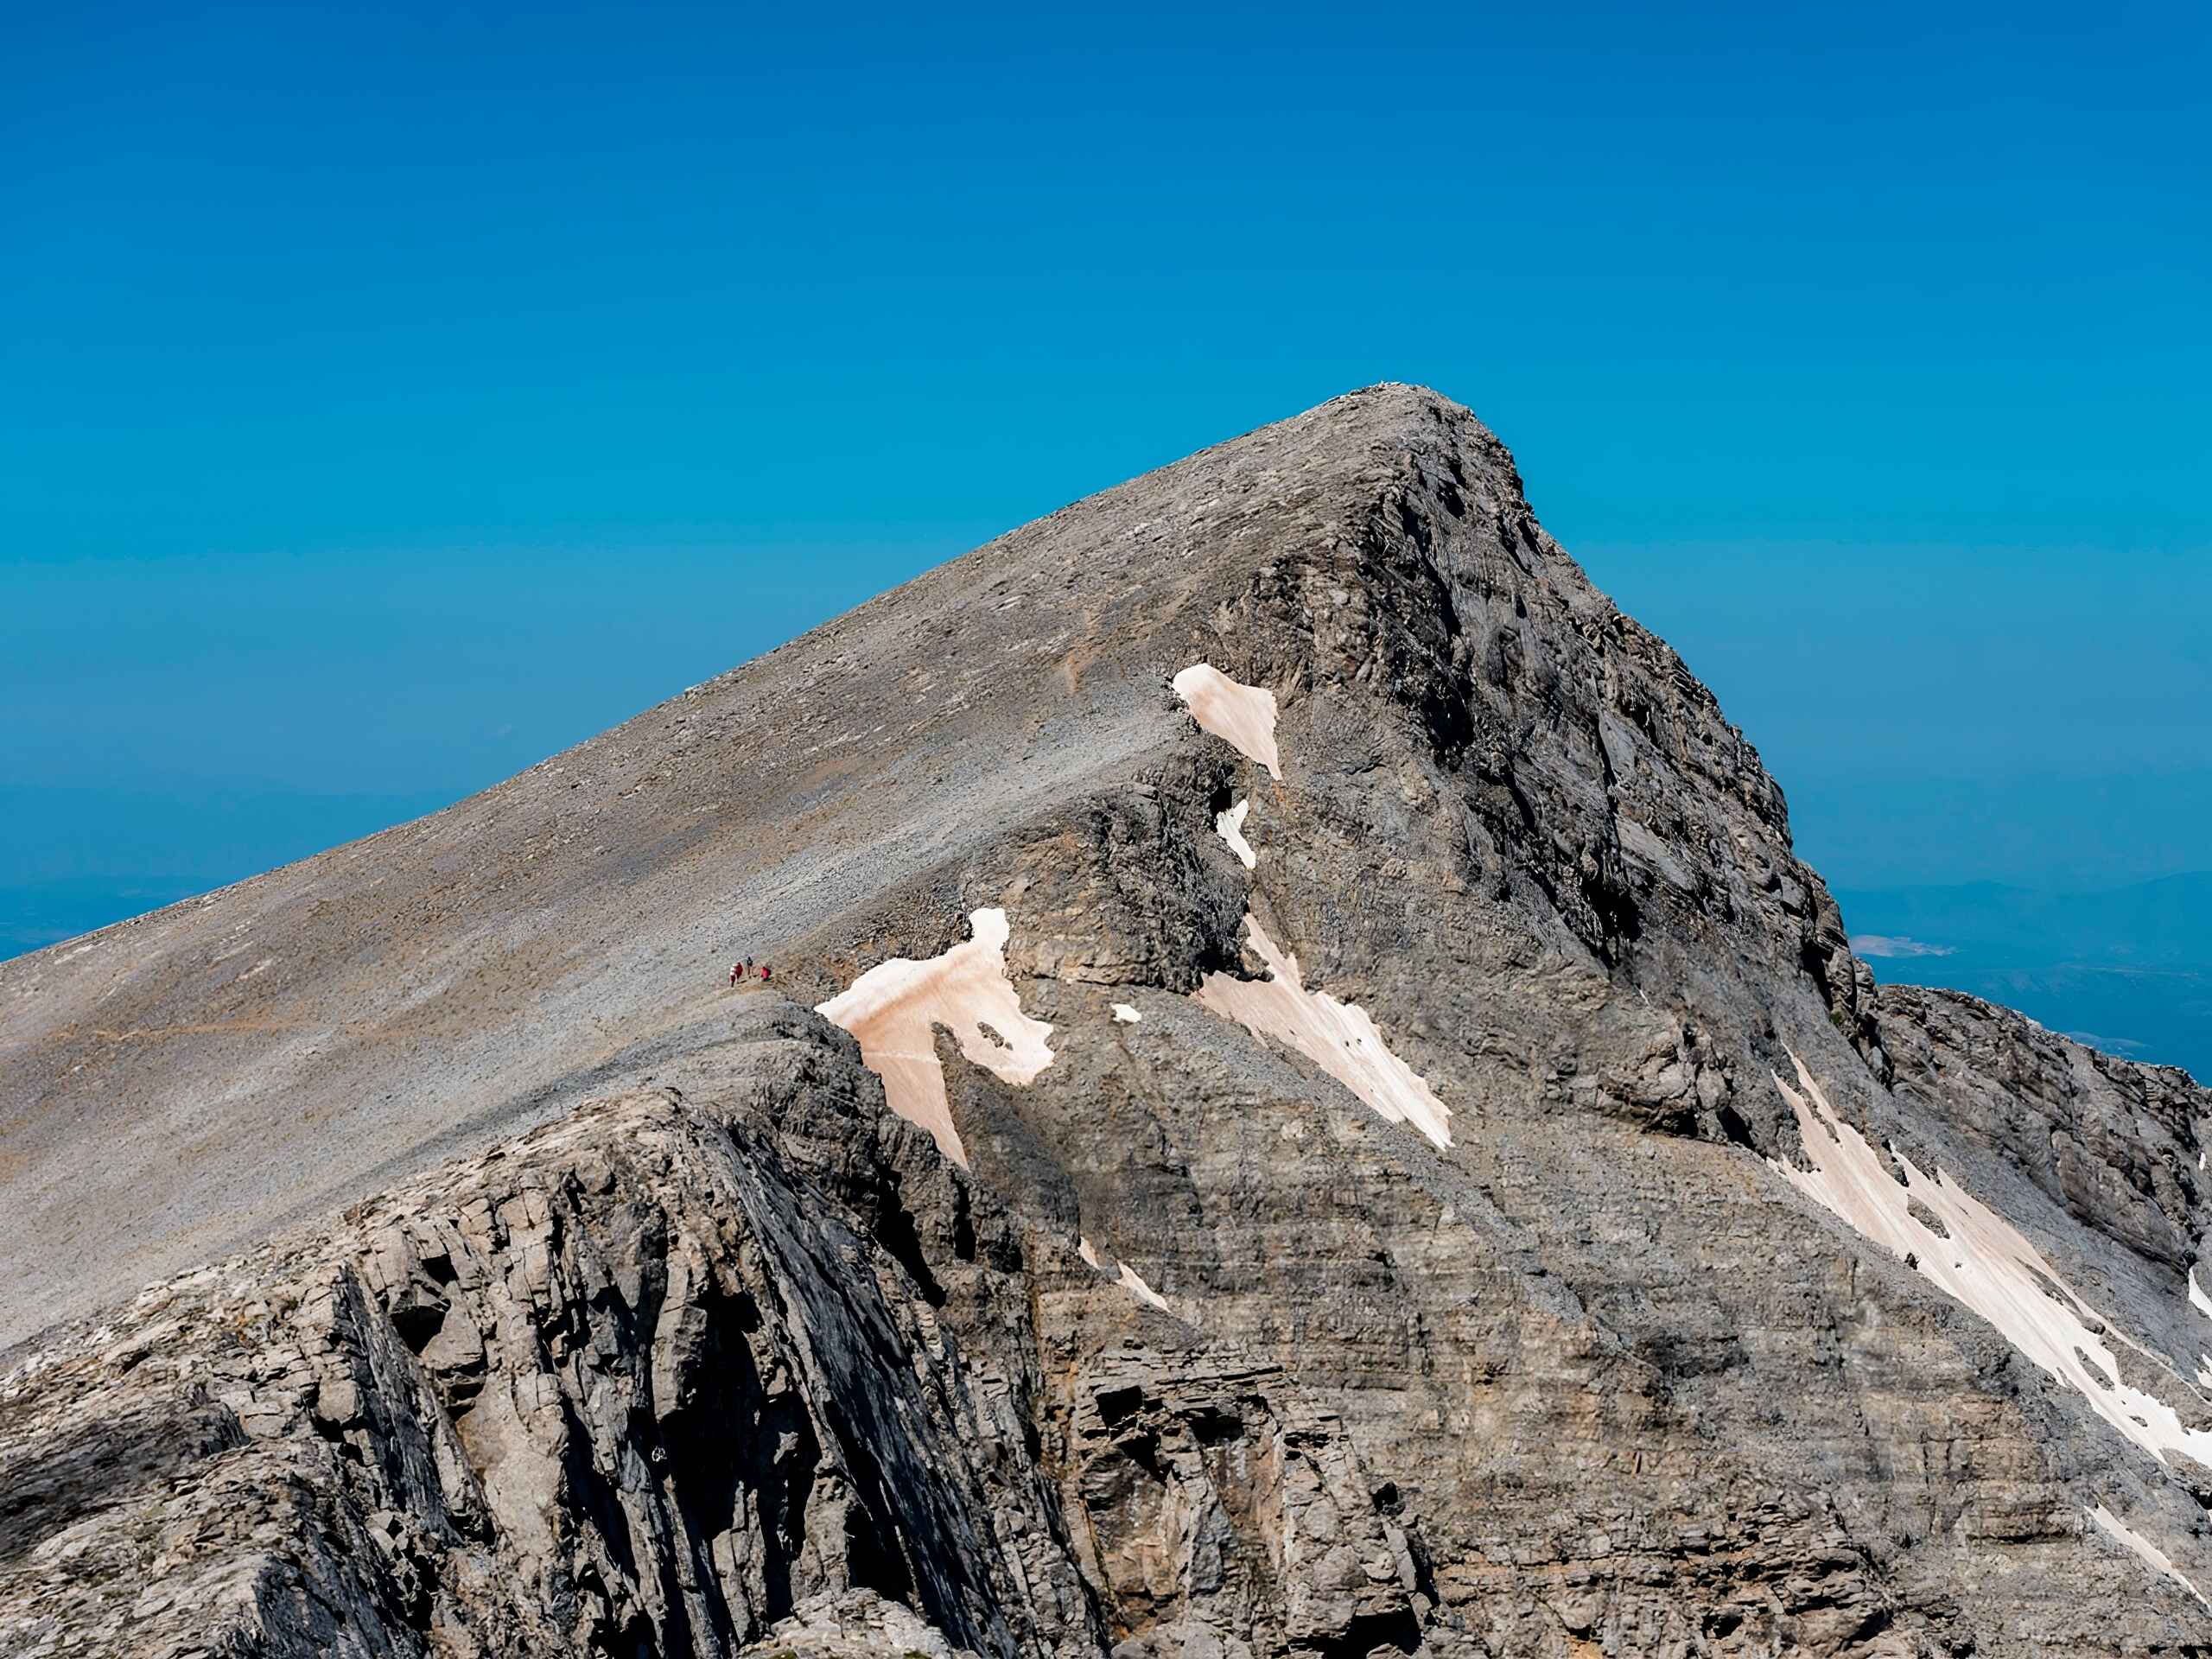 View of the route up Mount Olympus